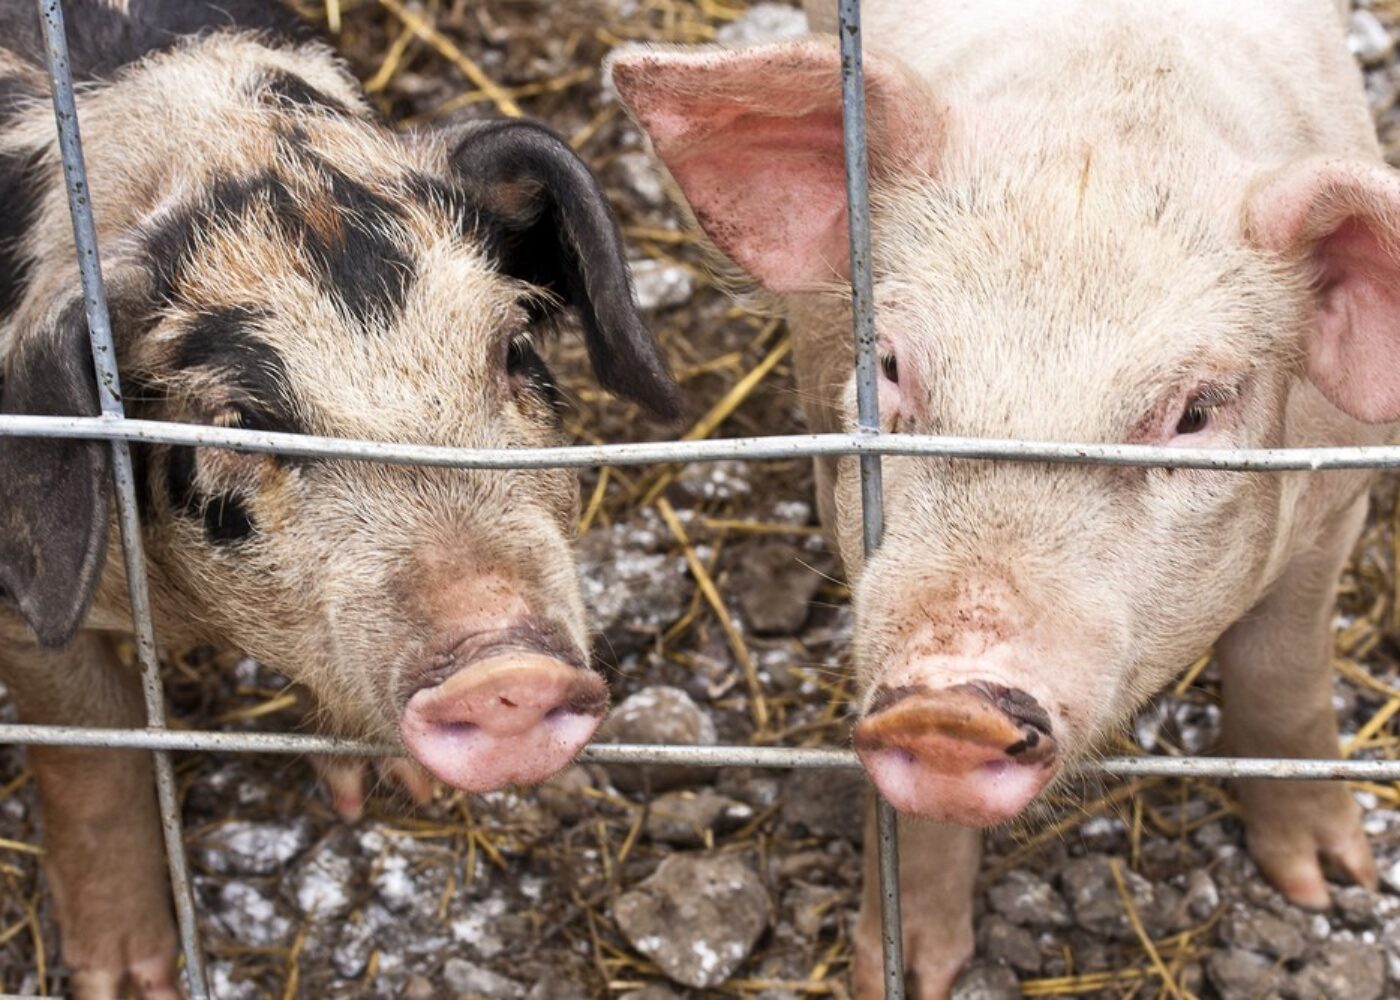 Pig feeding study shows problems with GMOs in animal feed